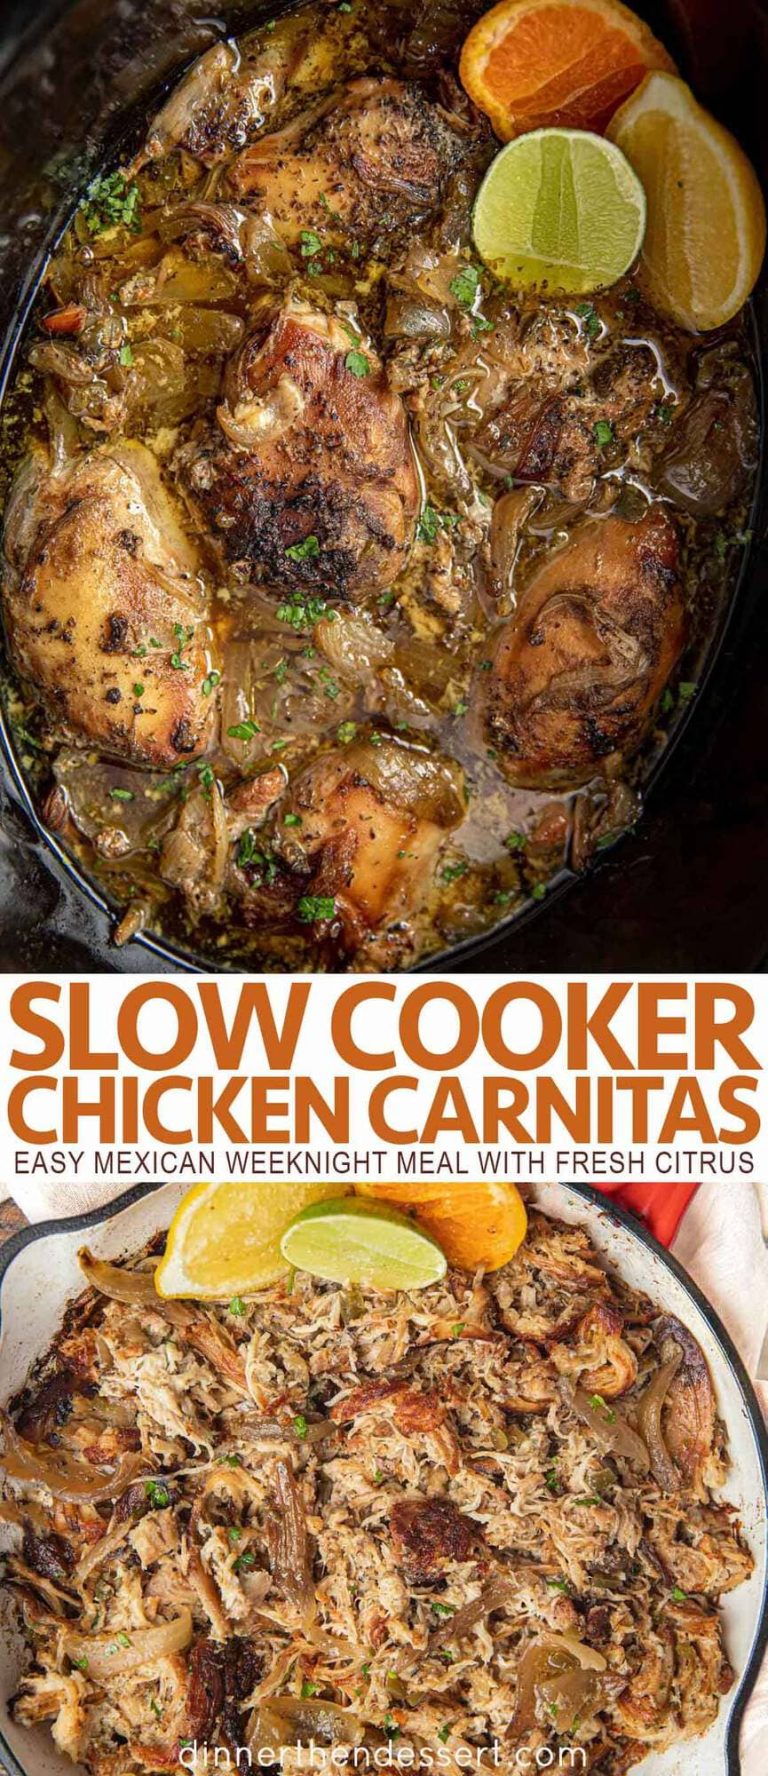 Slow Cooker Chicken Carnitas Recipe for Busy Weeknights